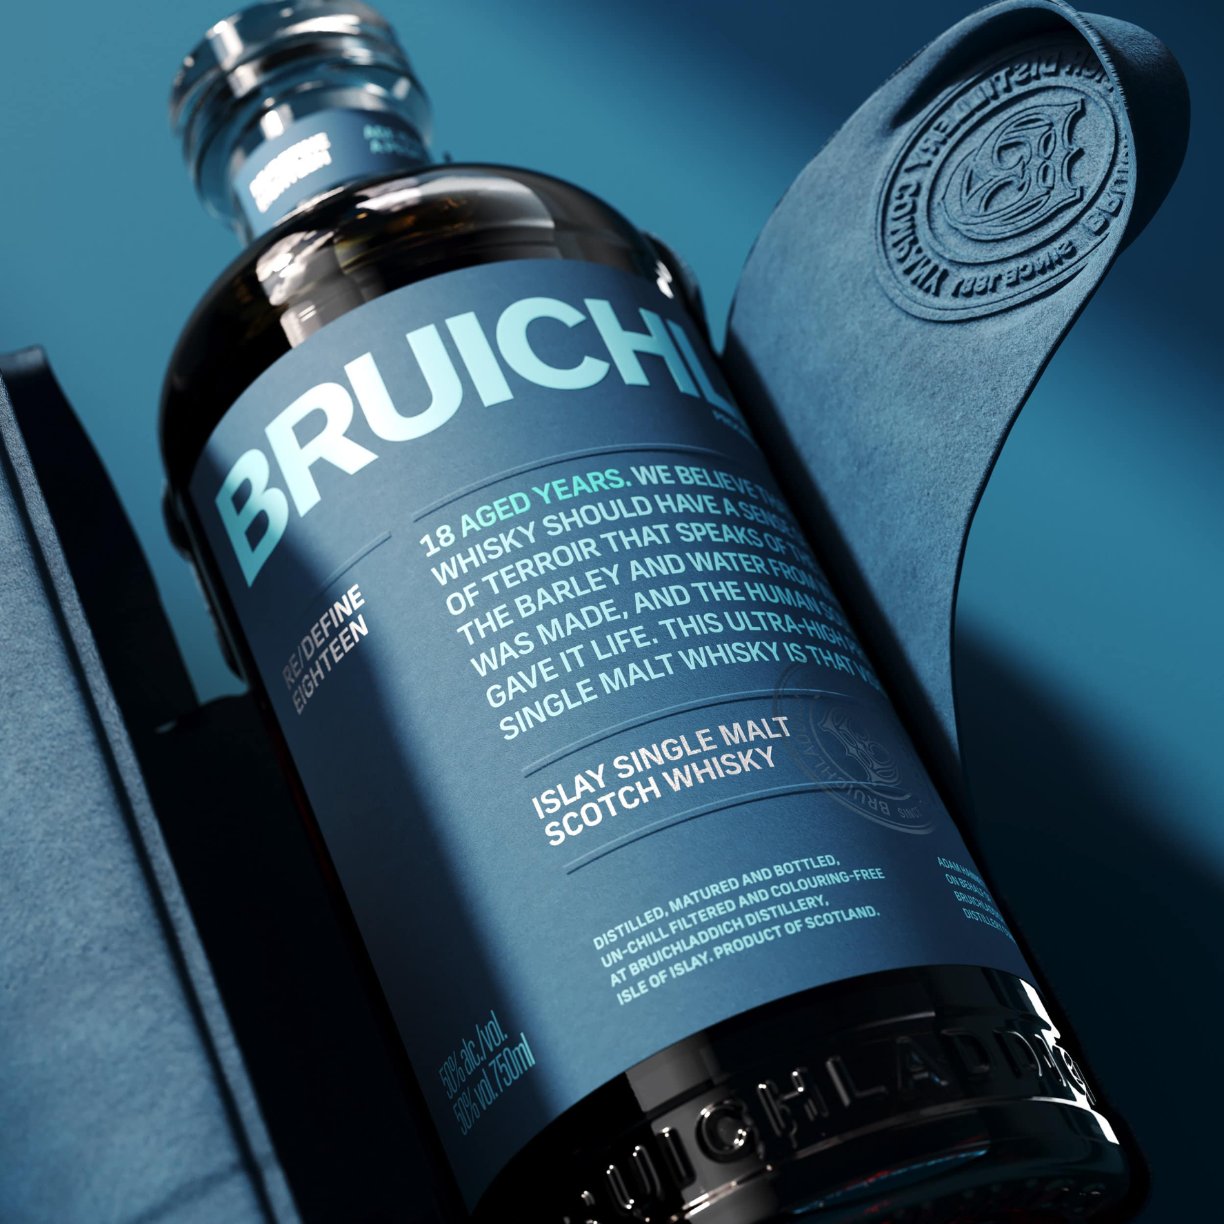 Bruichladdich Proves Top-Shelf Liquor Can Be Sustainable with a Stunning Bespoke Bottle